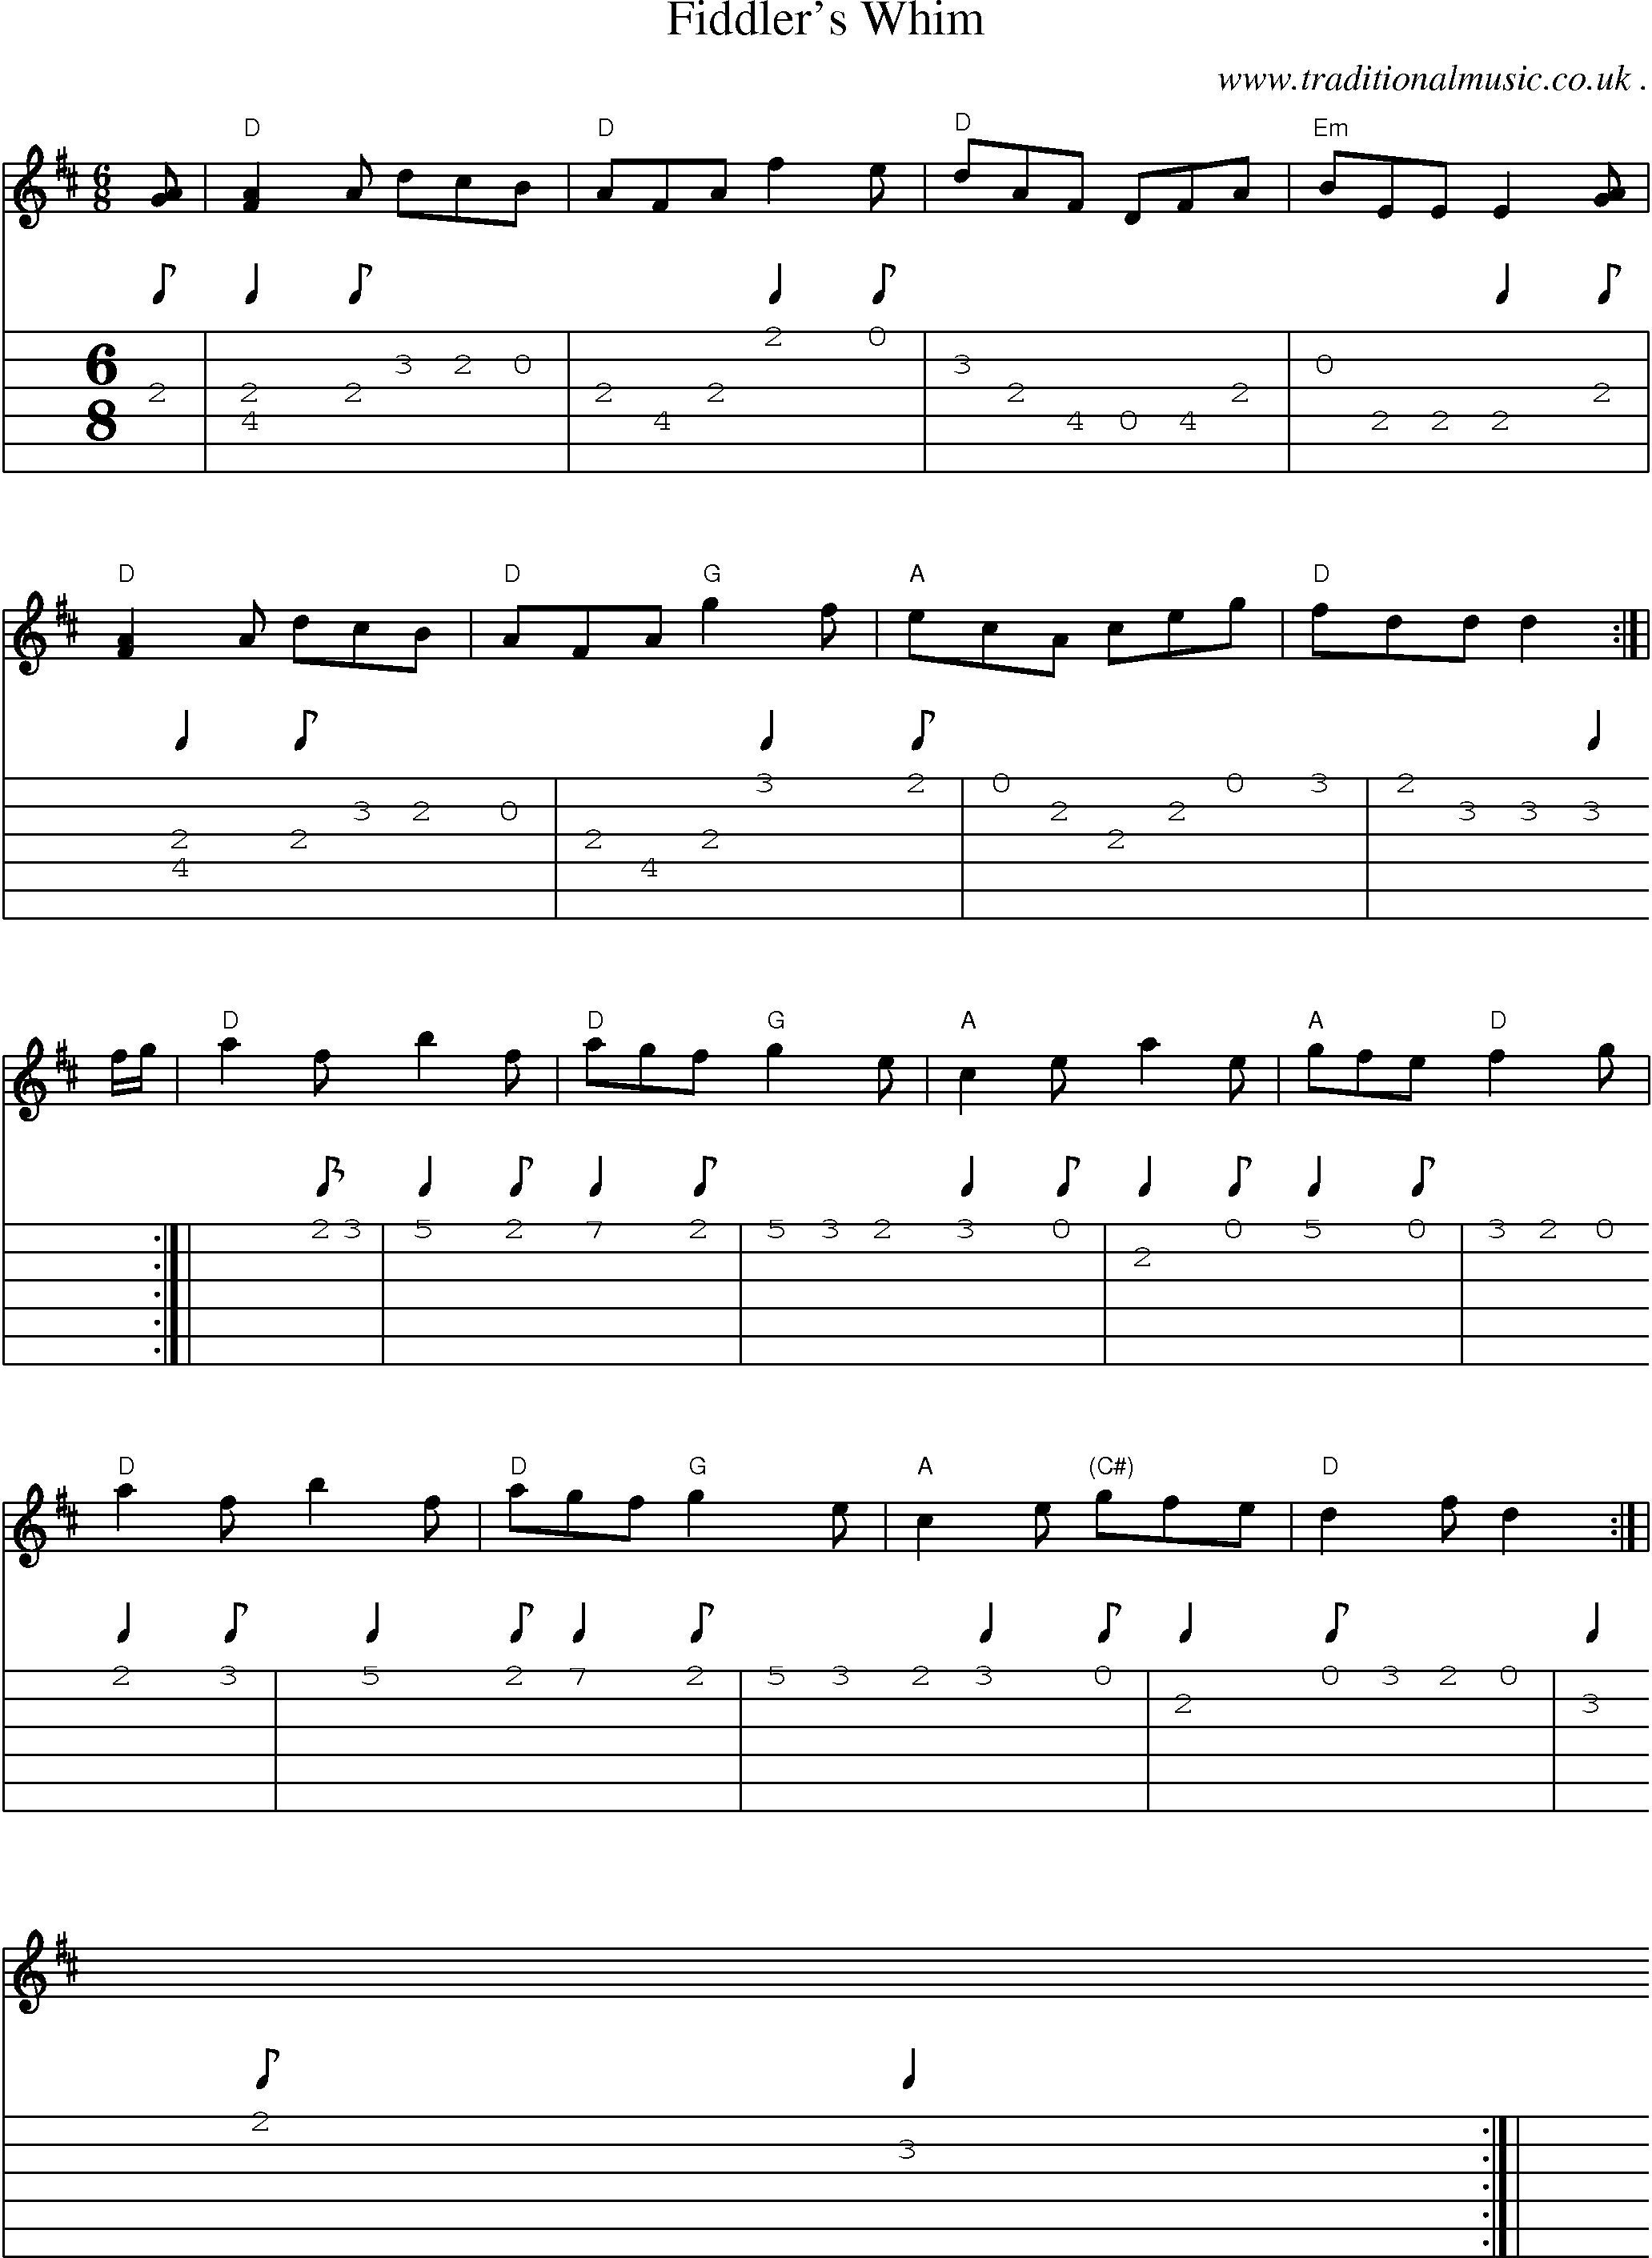 Sheet-music  score, Chords and Guitar Tabs for Fiddlers Whim